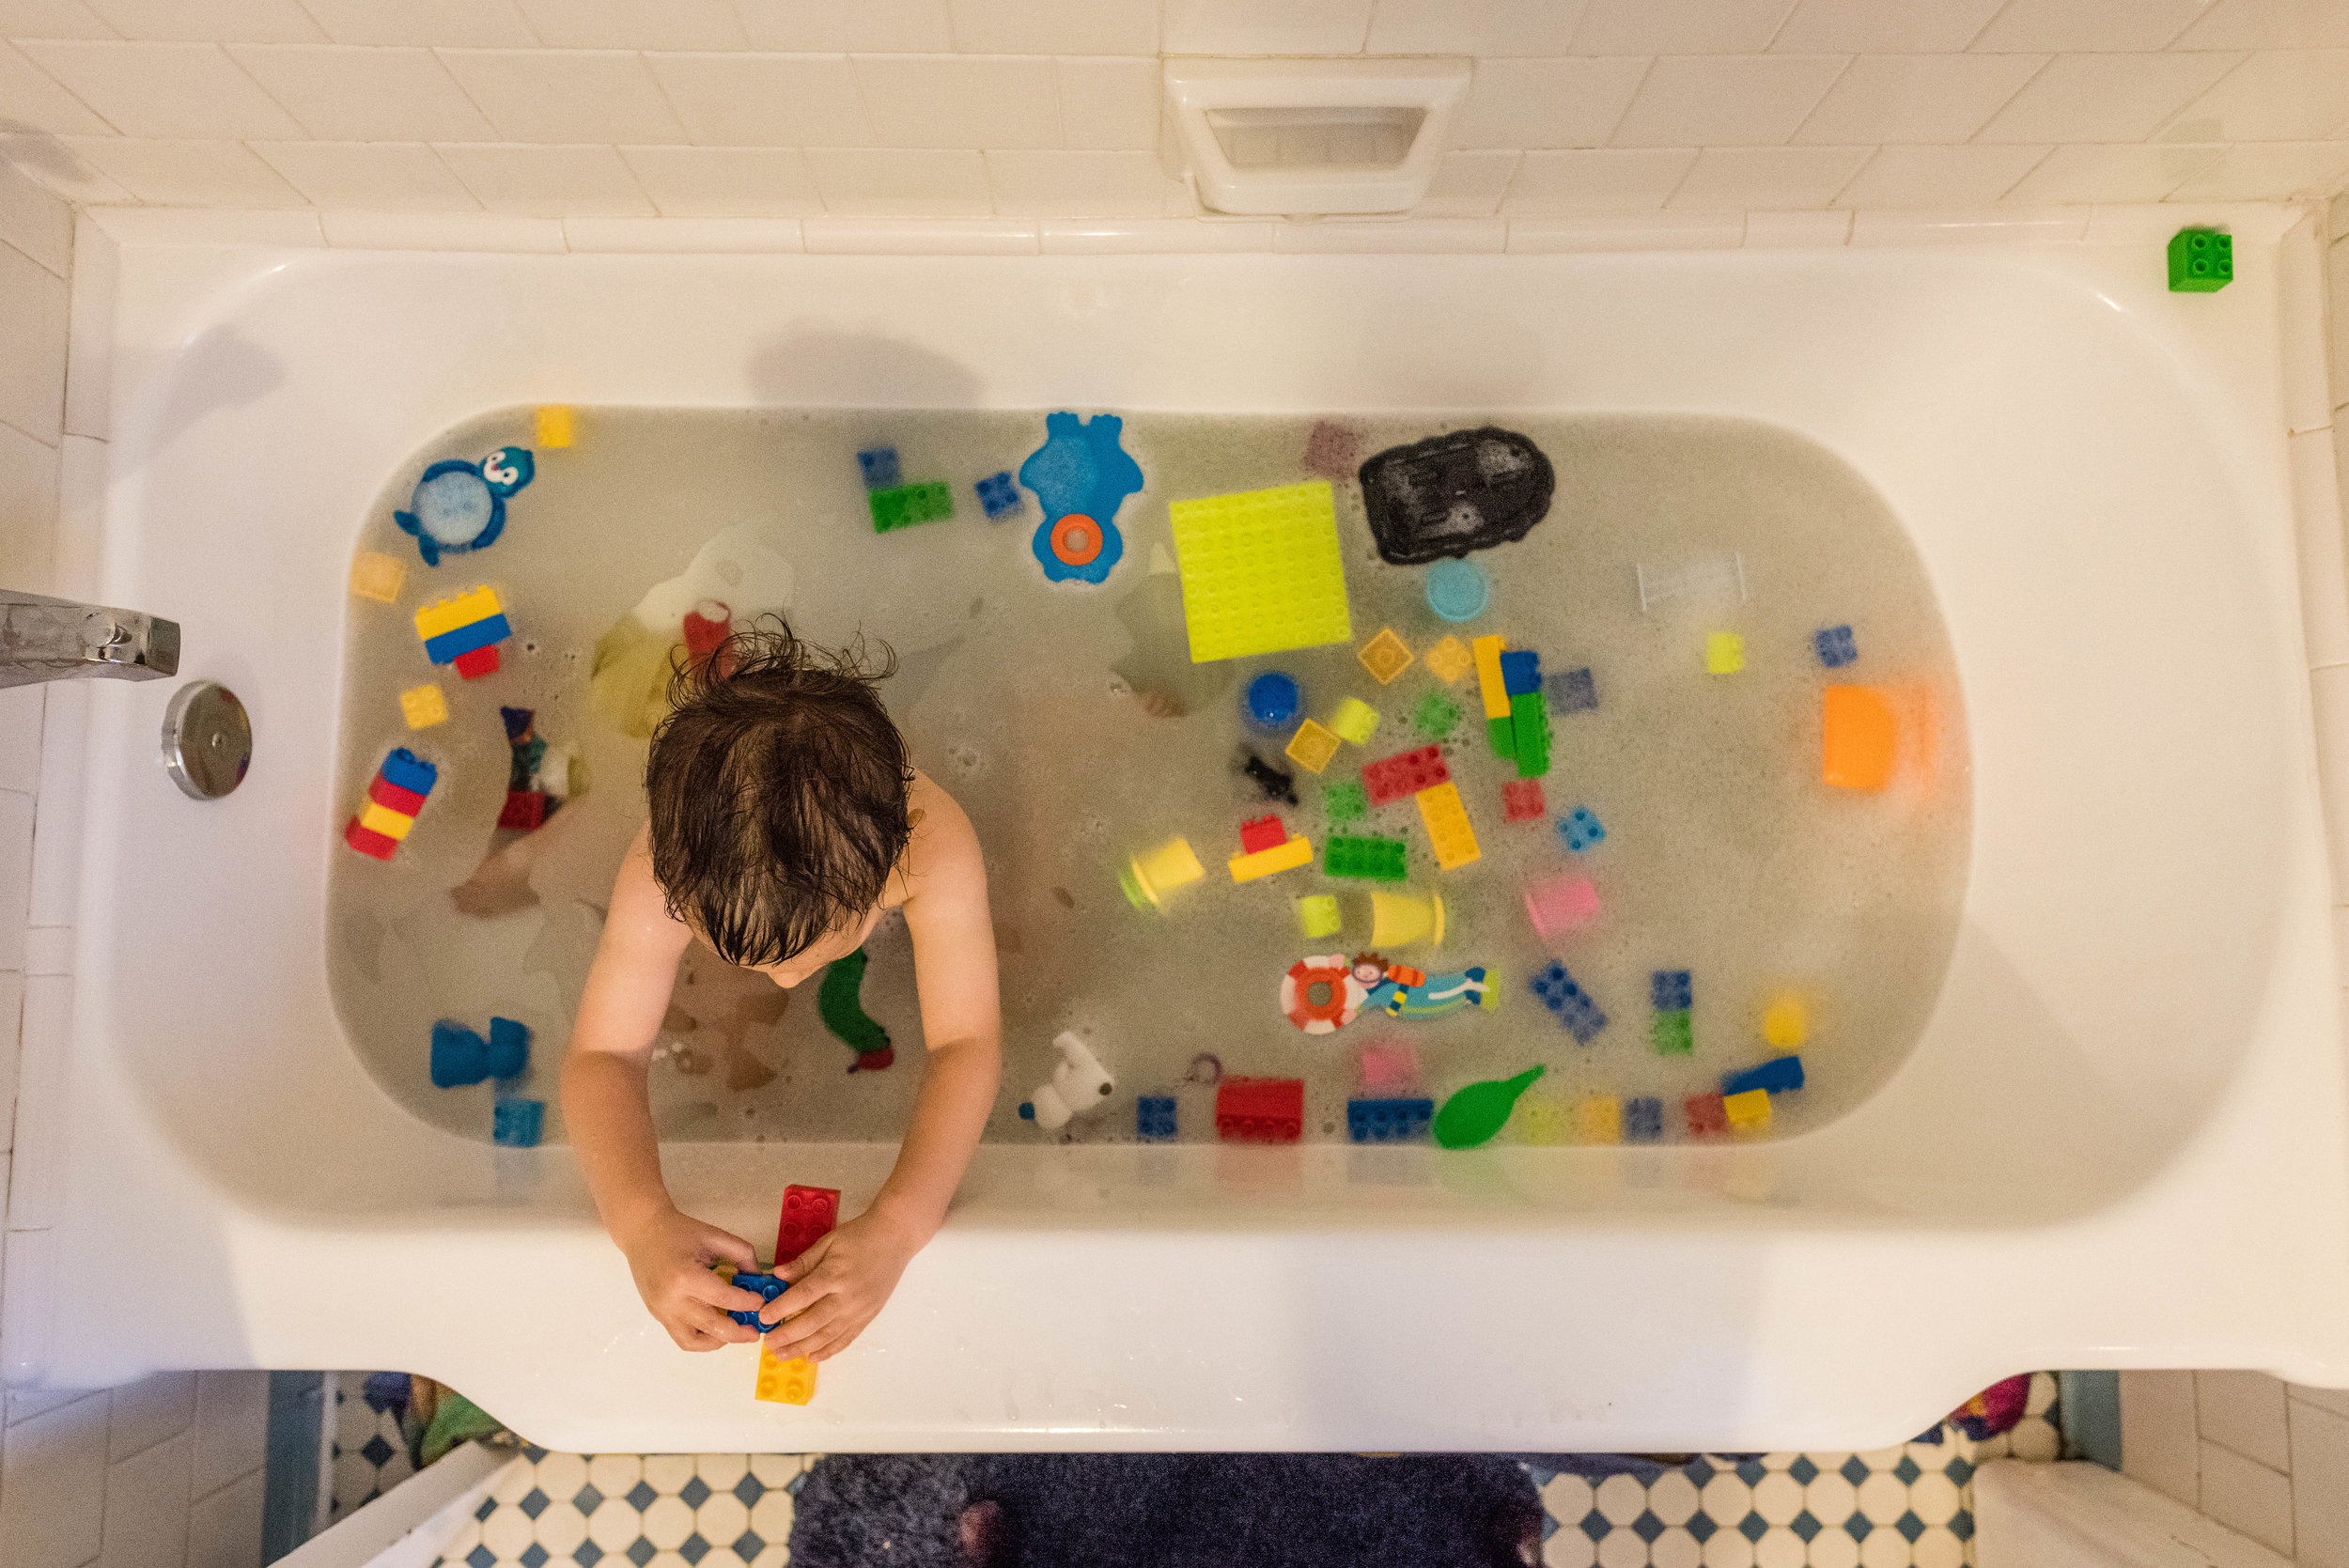 Boy playing with legos in bath by Northern Virginia Family Photographer Nicole Sanchez